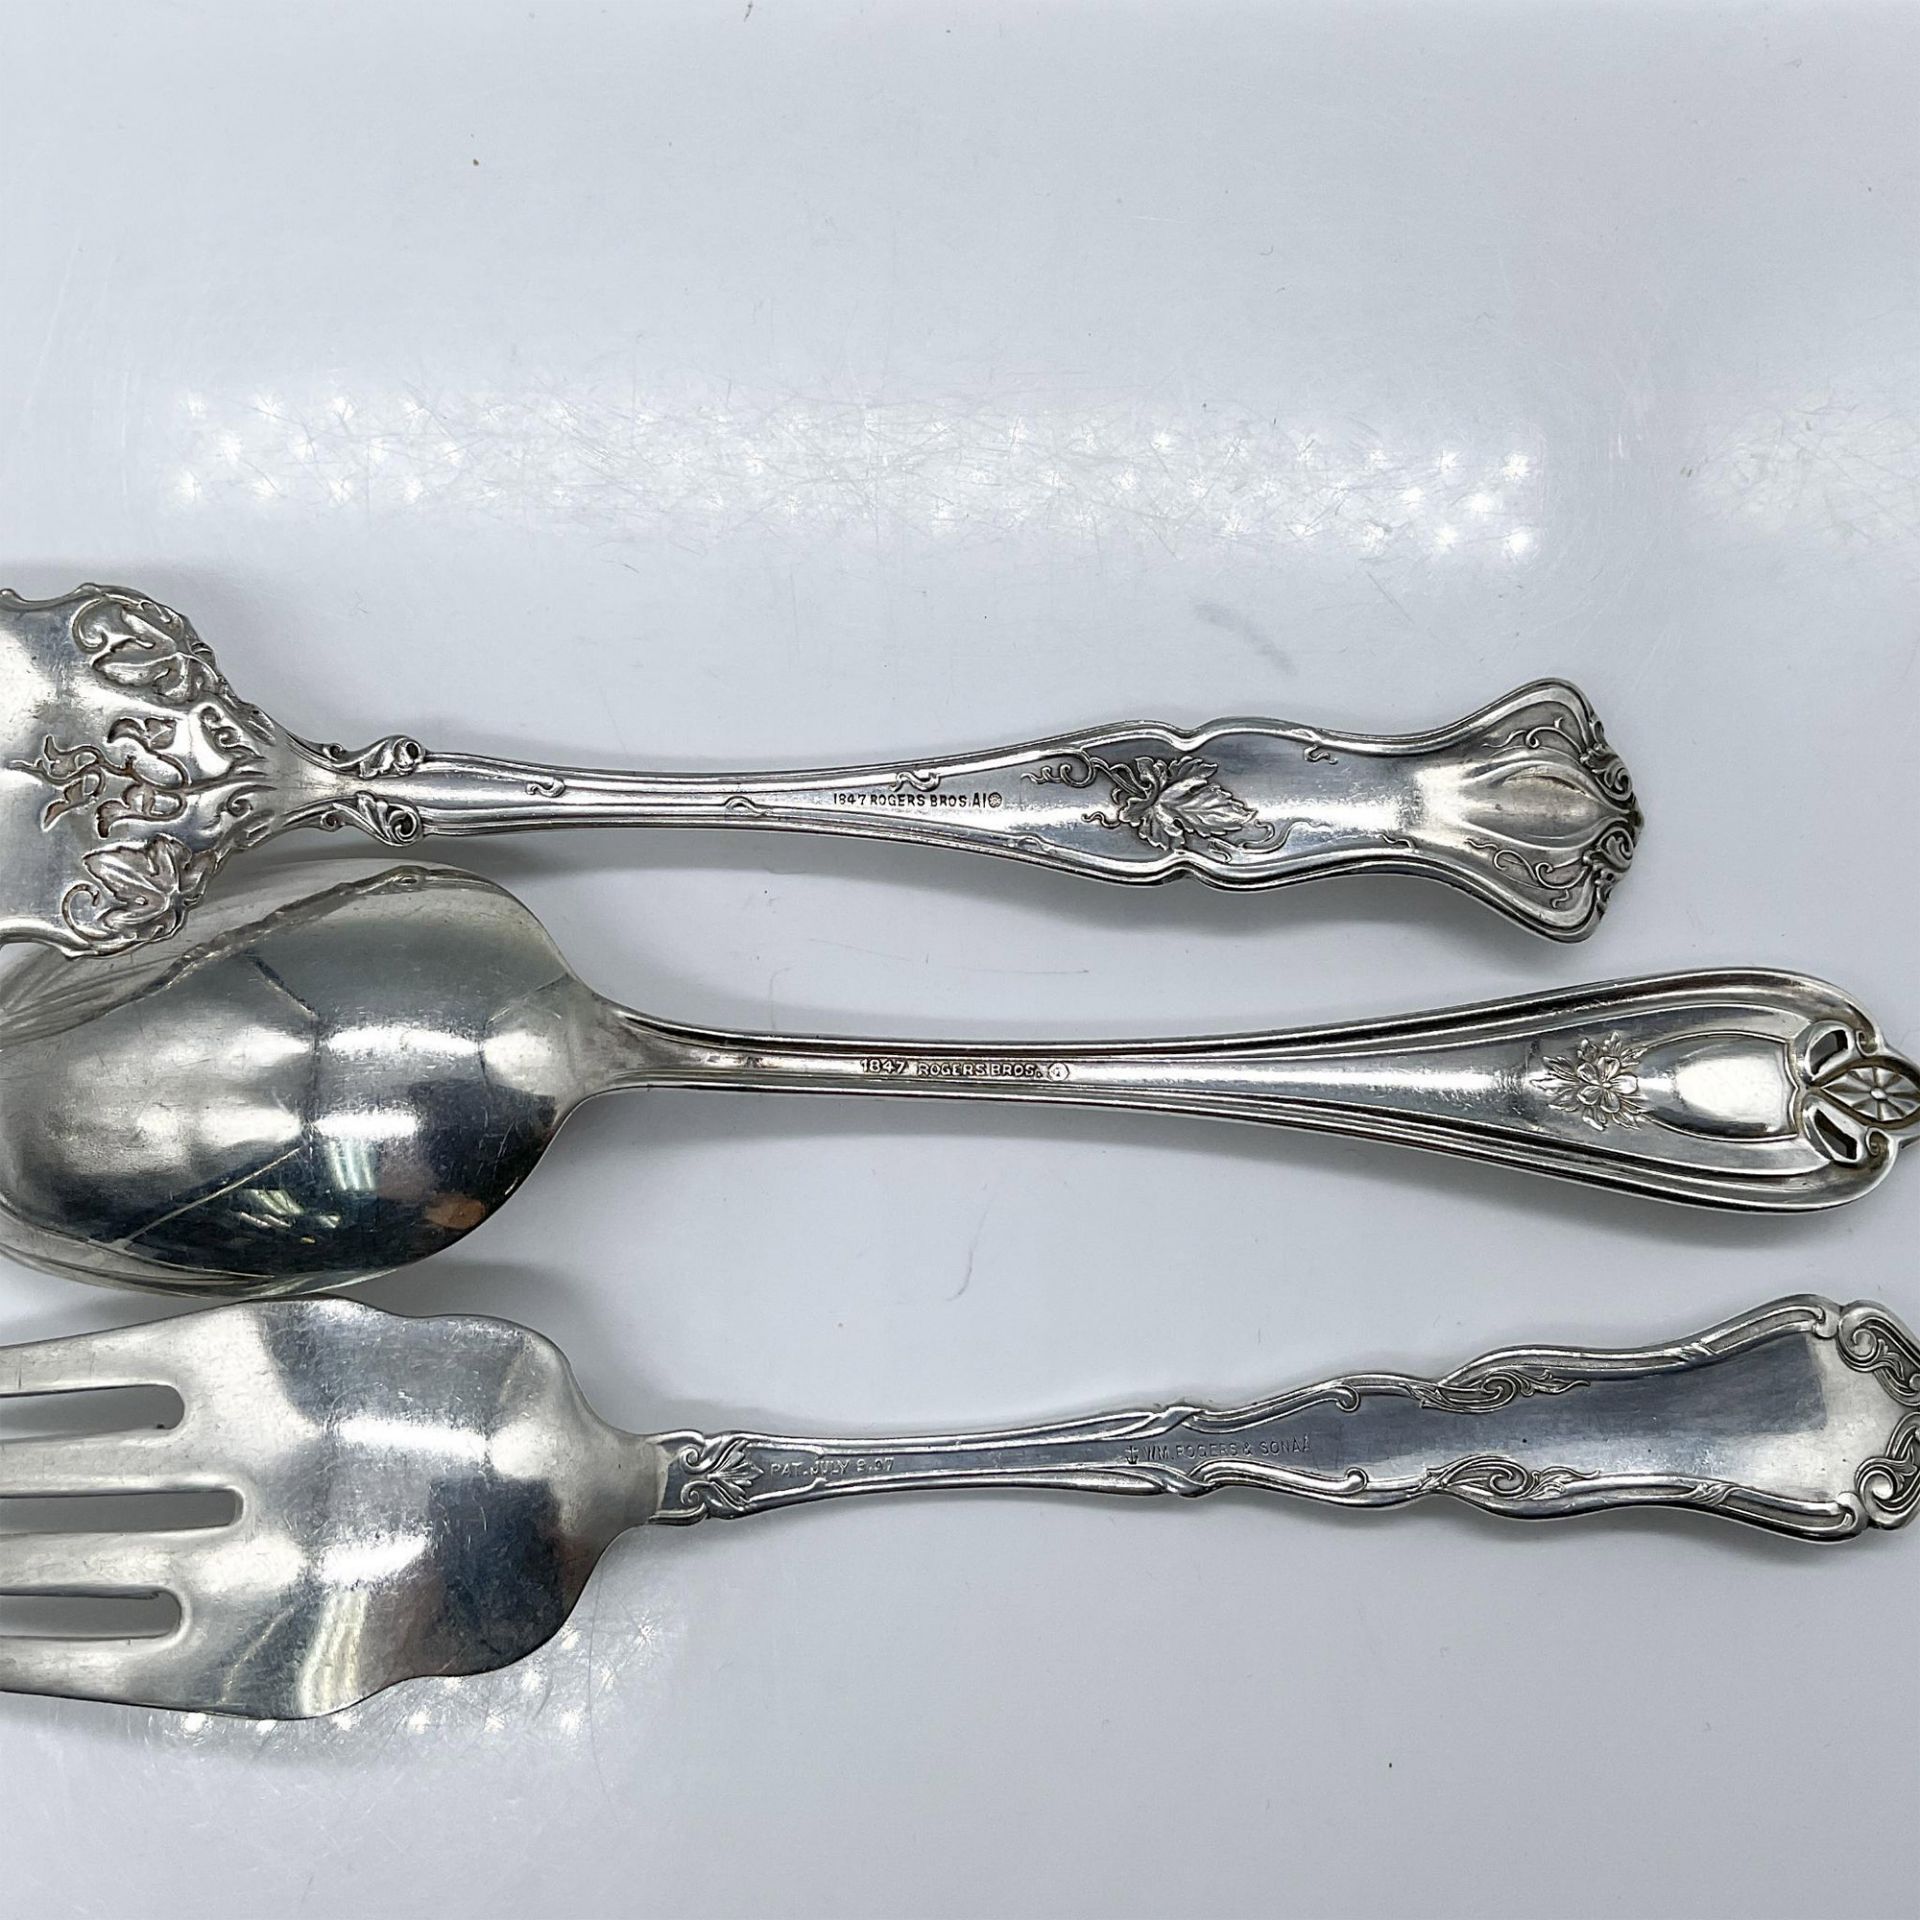 3pc Rogers Silver Plated Serving Forks and Spoon - Image 3 of 3